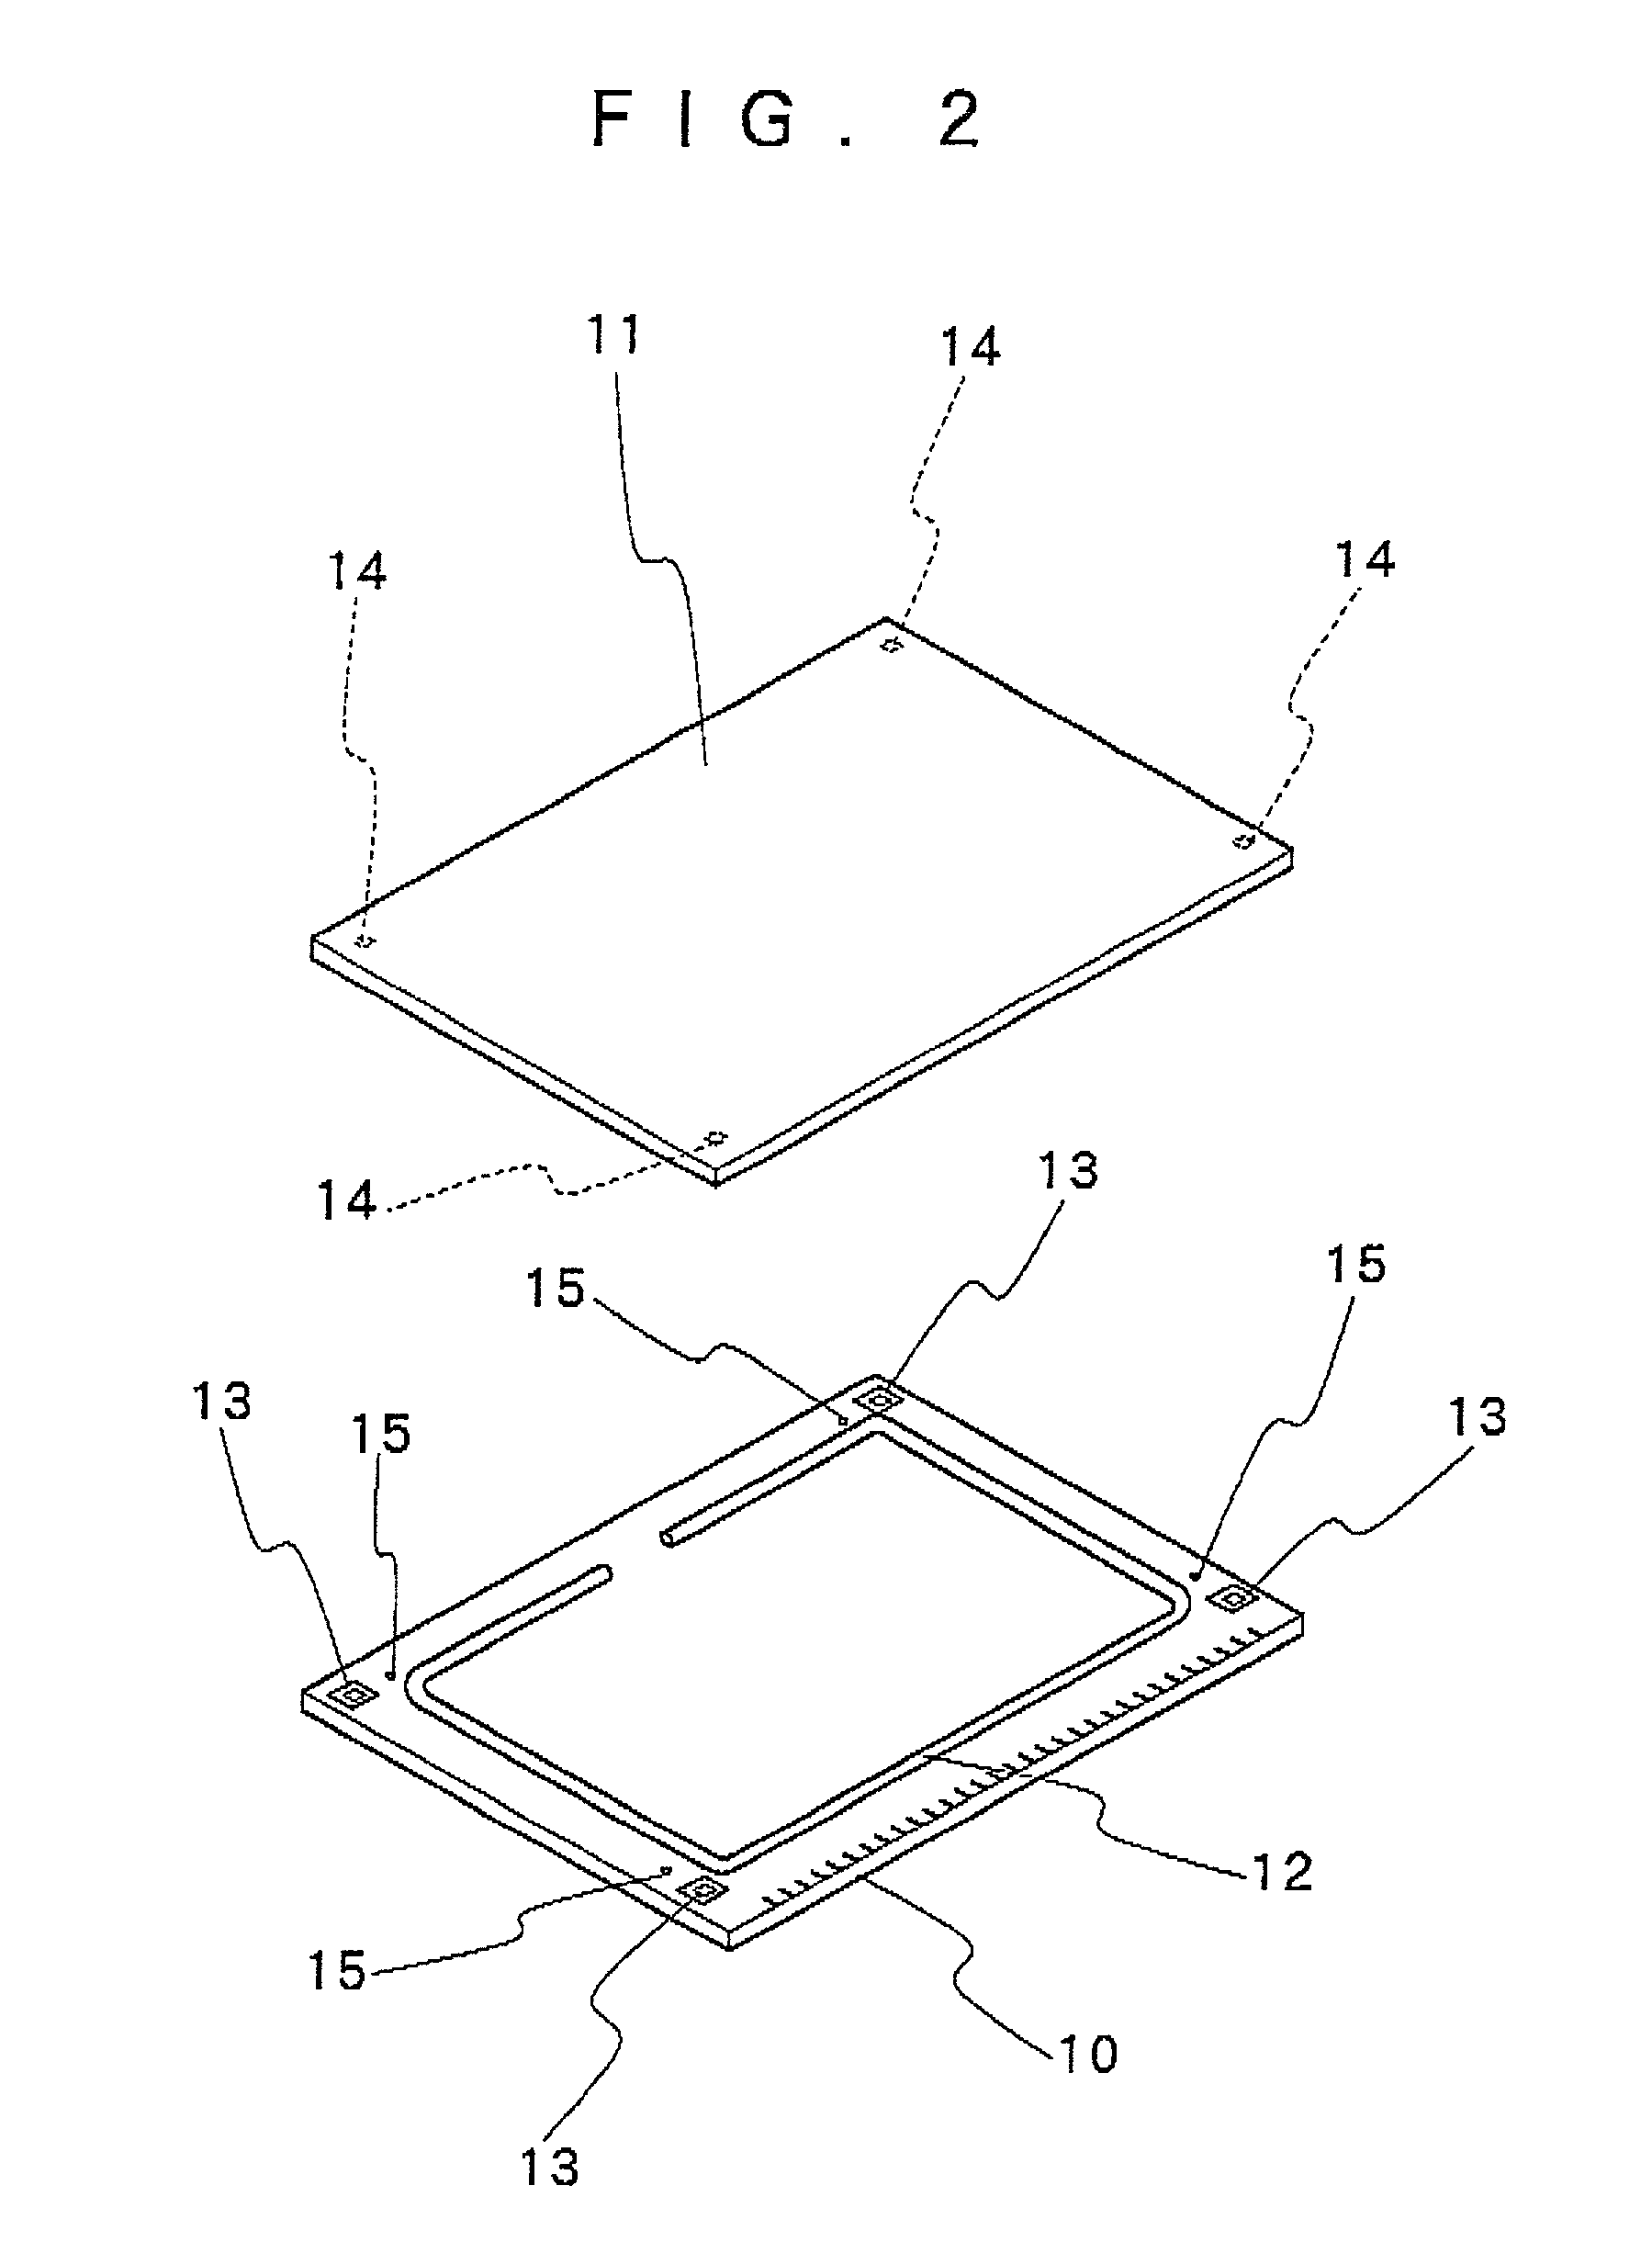 Method and apparatus for bonding substrate plates together through gap-forming sealer material